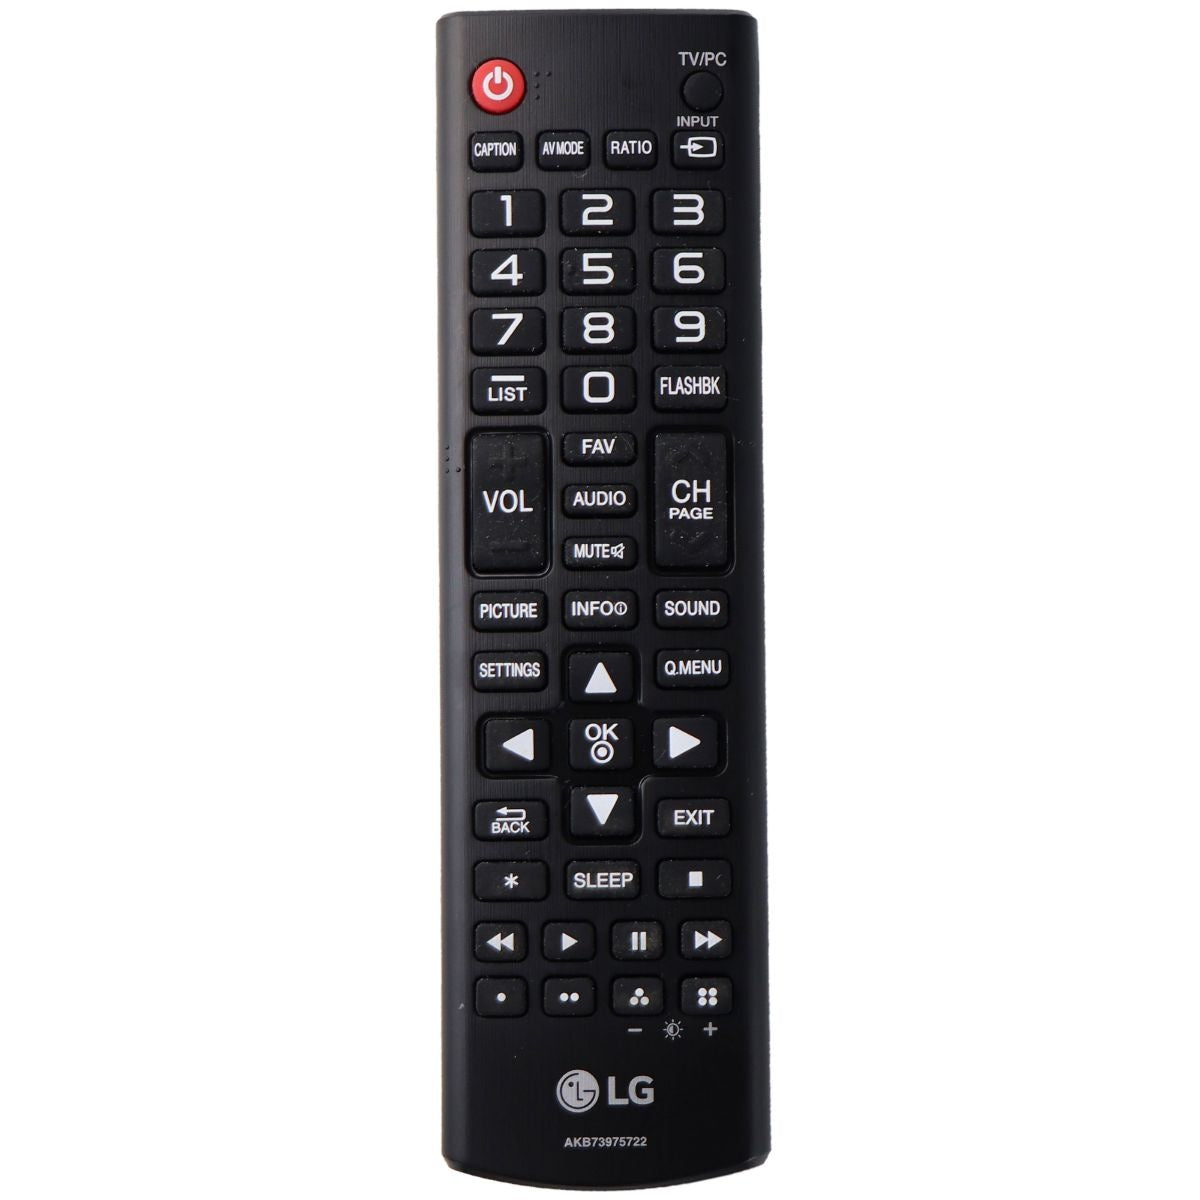 LG Remote Control (AKB73975722) for Select LG TVs - Black TV, Video & Audio Accessories - Remote Controls LG    - Simple Cell Bulk Wholesale Pricing - USA Seller